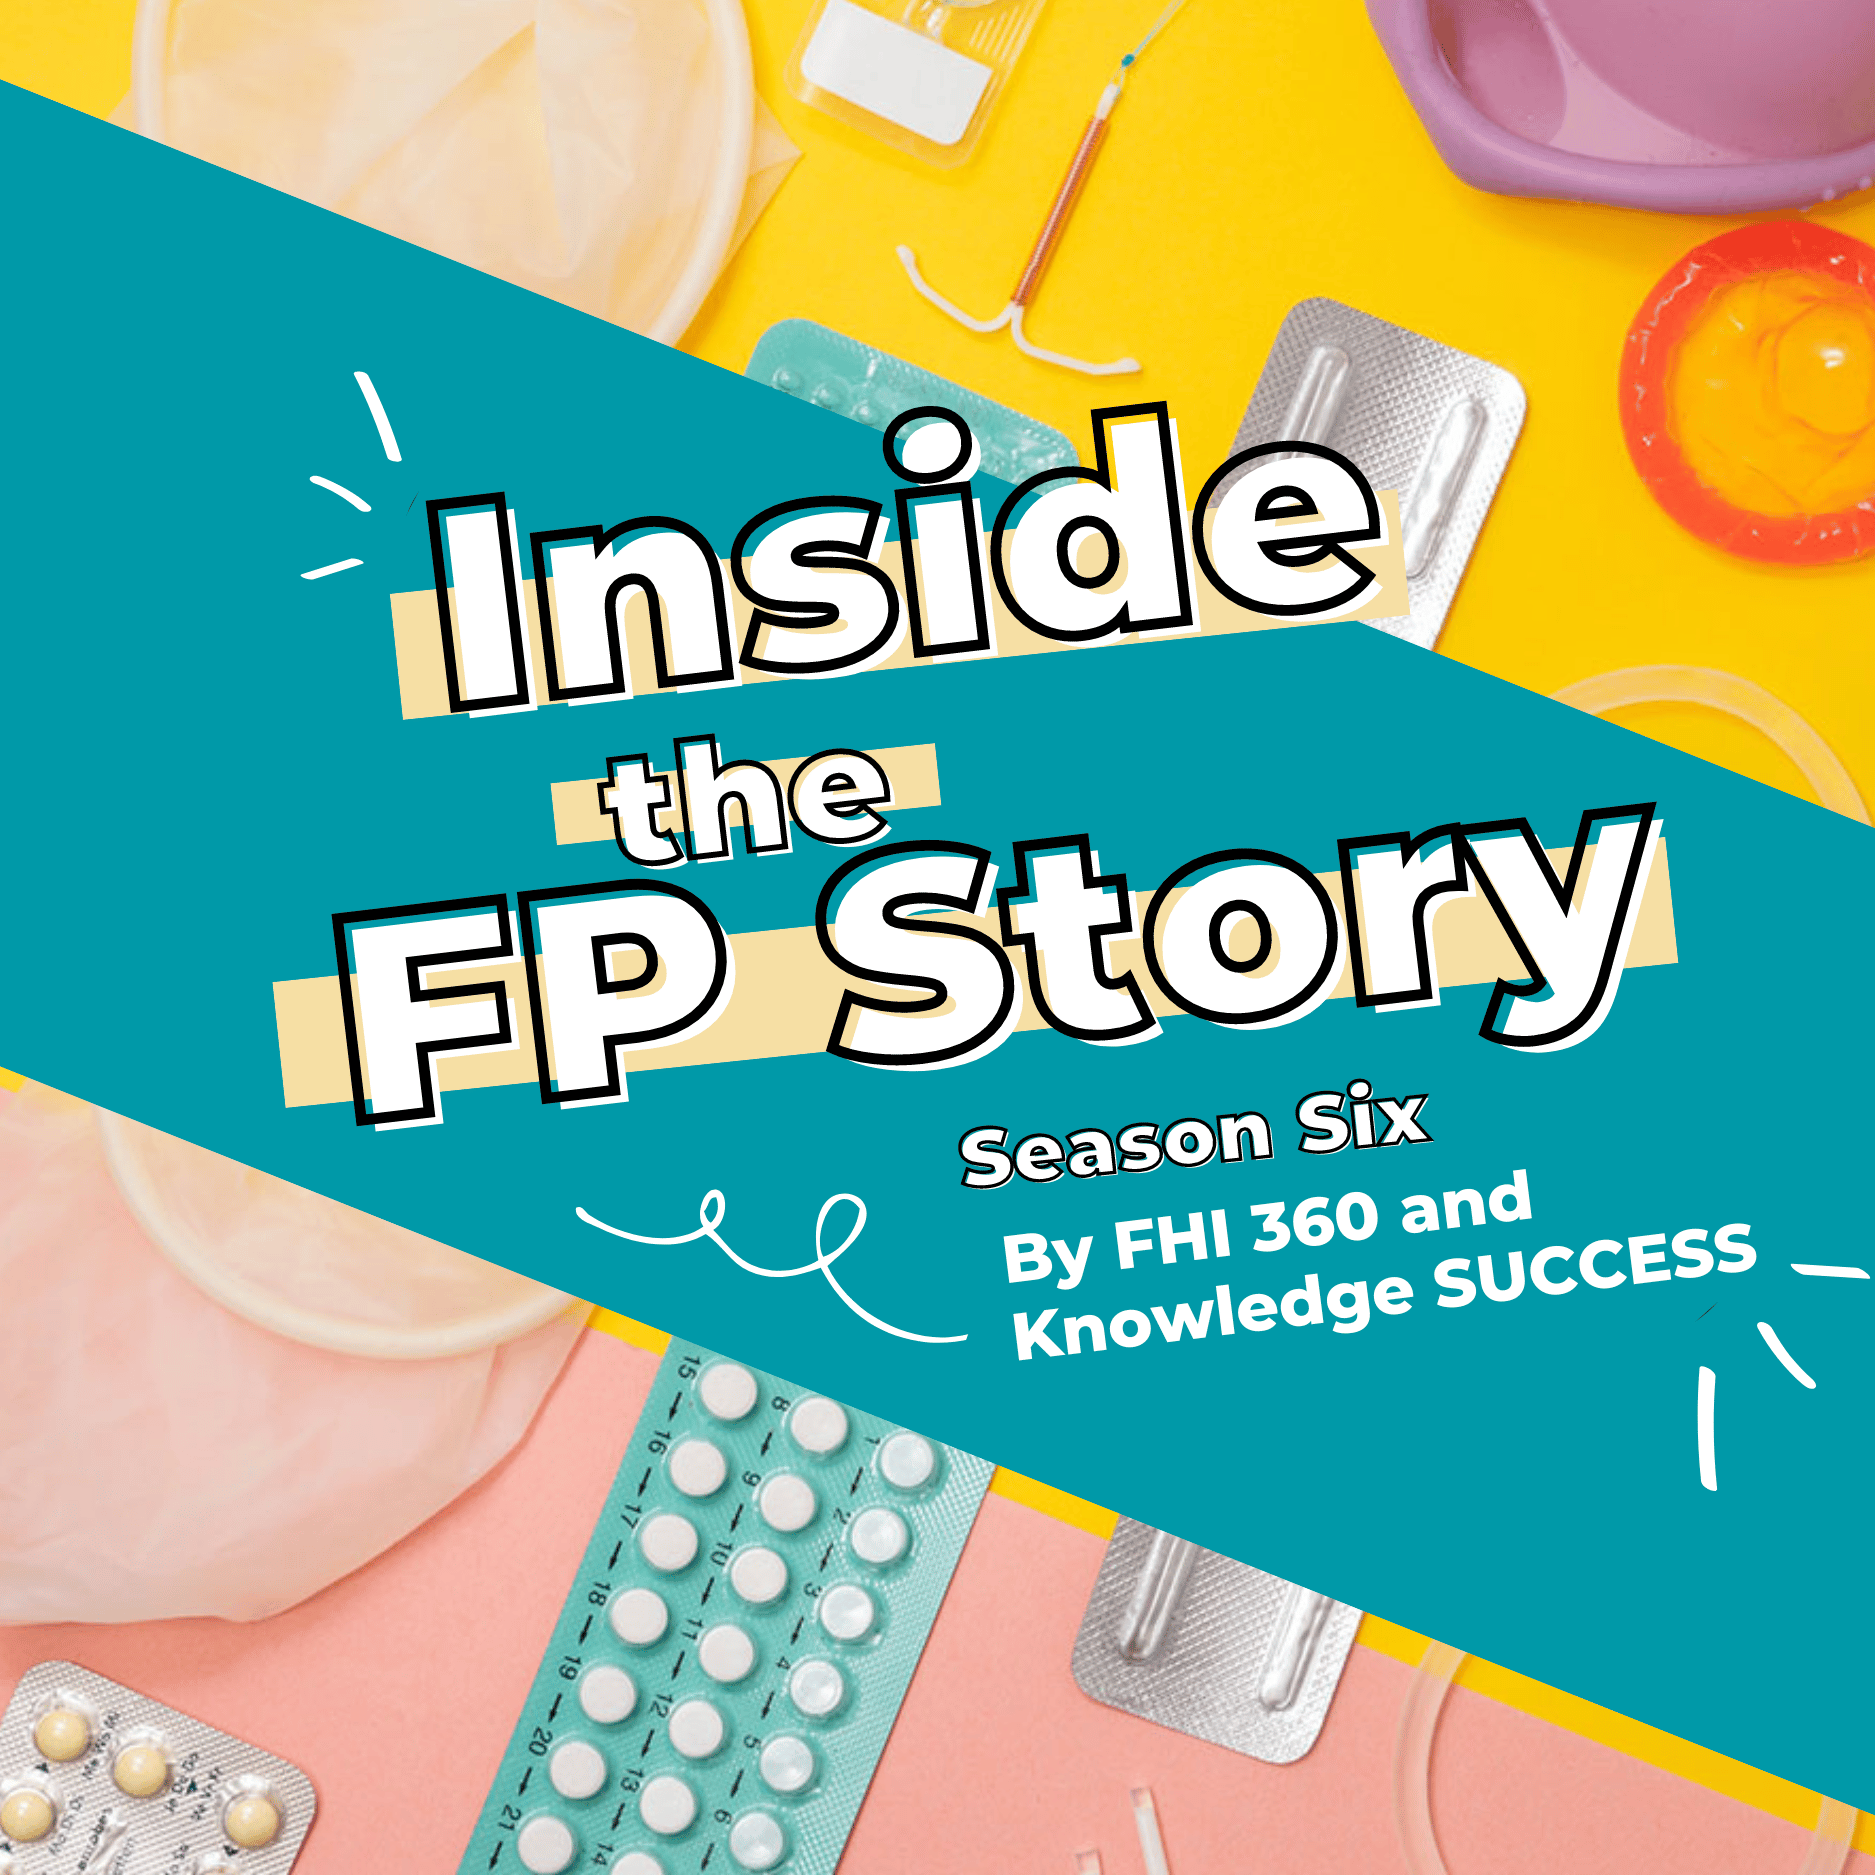 This image shows the words "Inside the FP Story: Season 6 by FHI 360 and Knowledge SUCCESS." It includes images of various contraceptives.